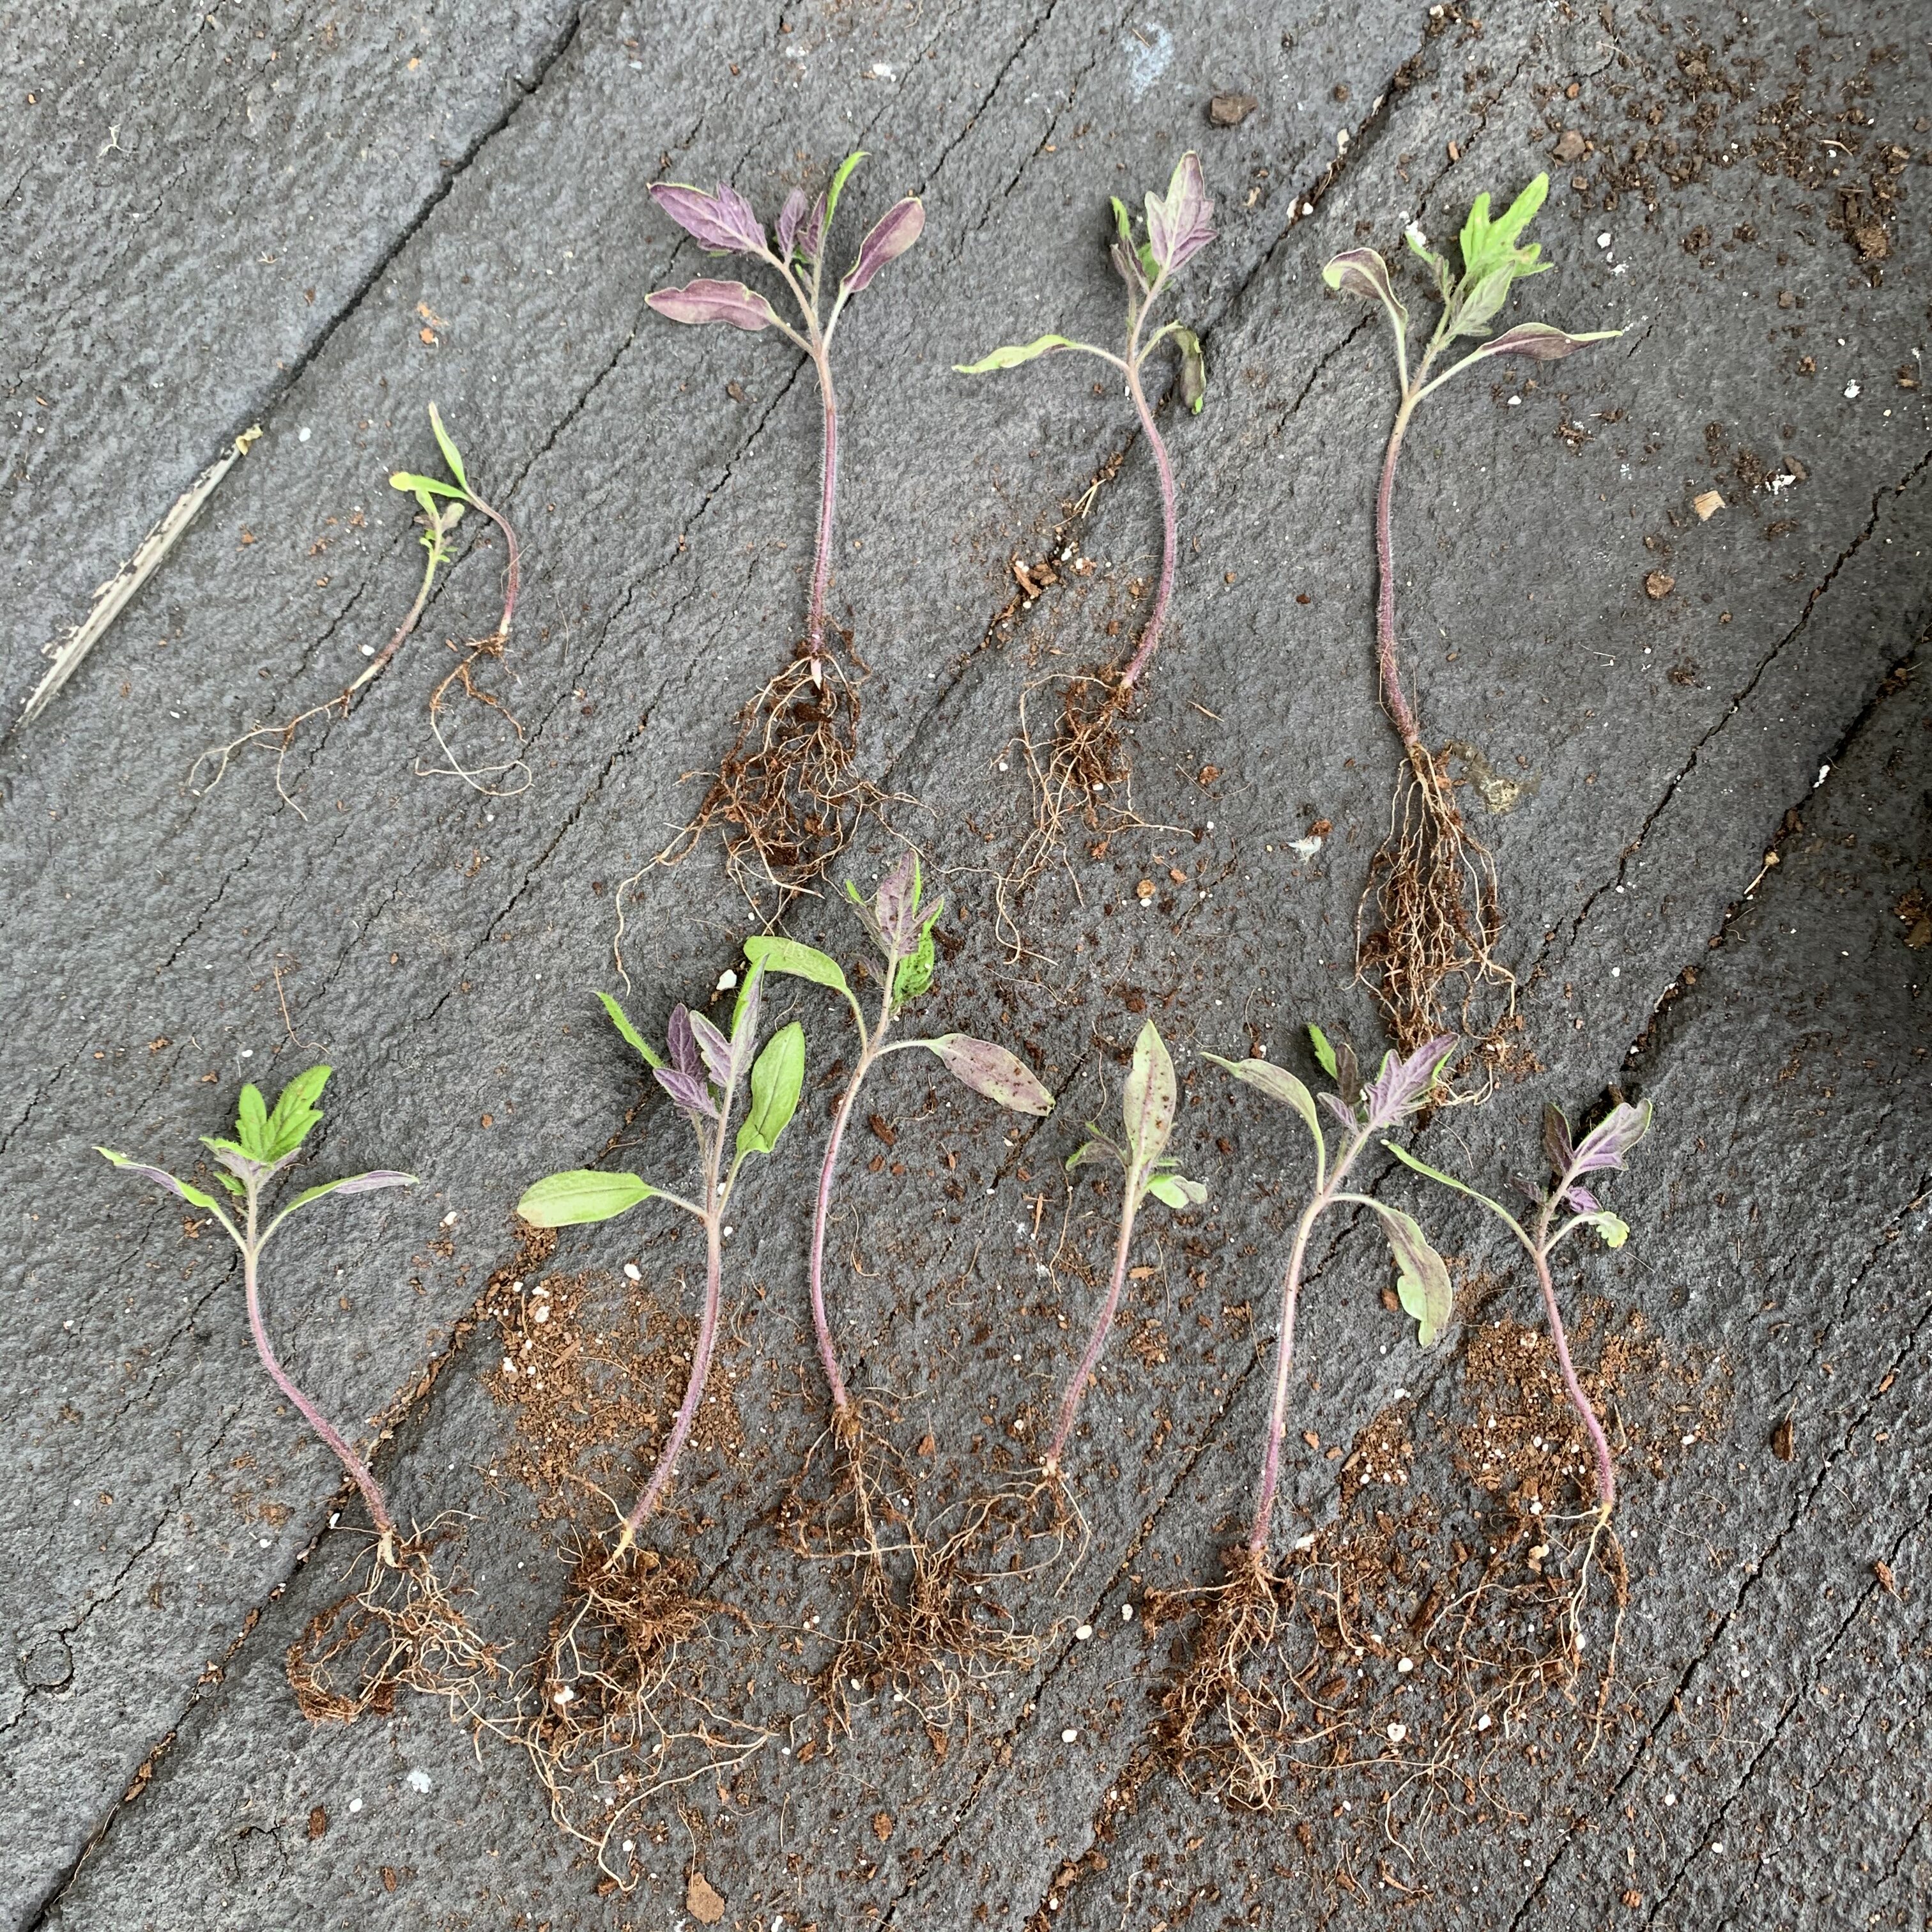 3FEC781F 02F8 4737 A77D 2C4139B0ABC6 Comparing Burpee Organic Seed Starting Mix vs Miracle Gro Moisture Control Potting Mix for transplanted tomato seedlings